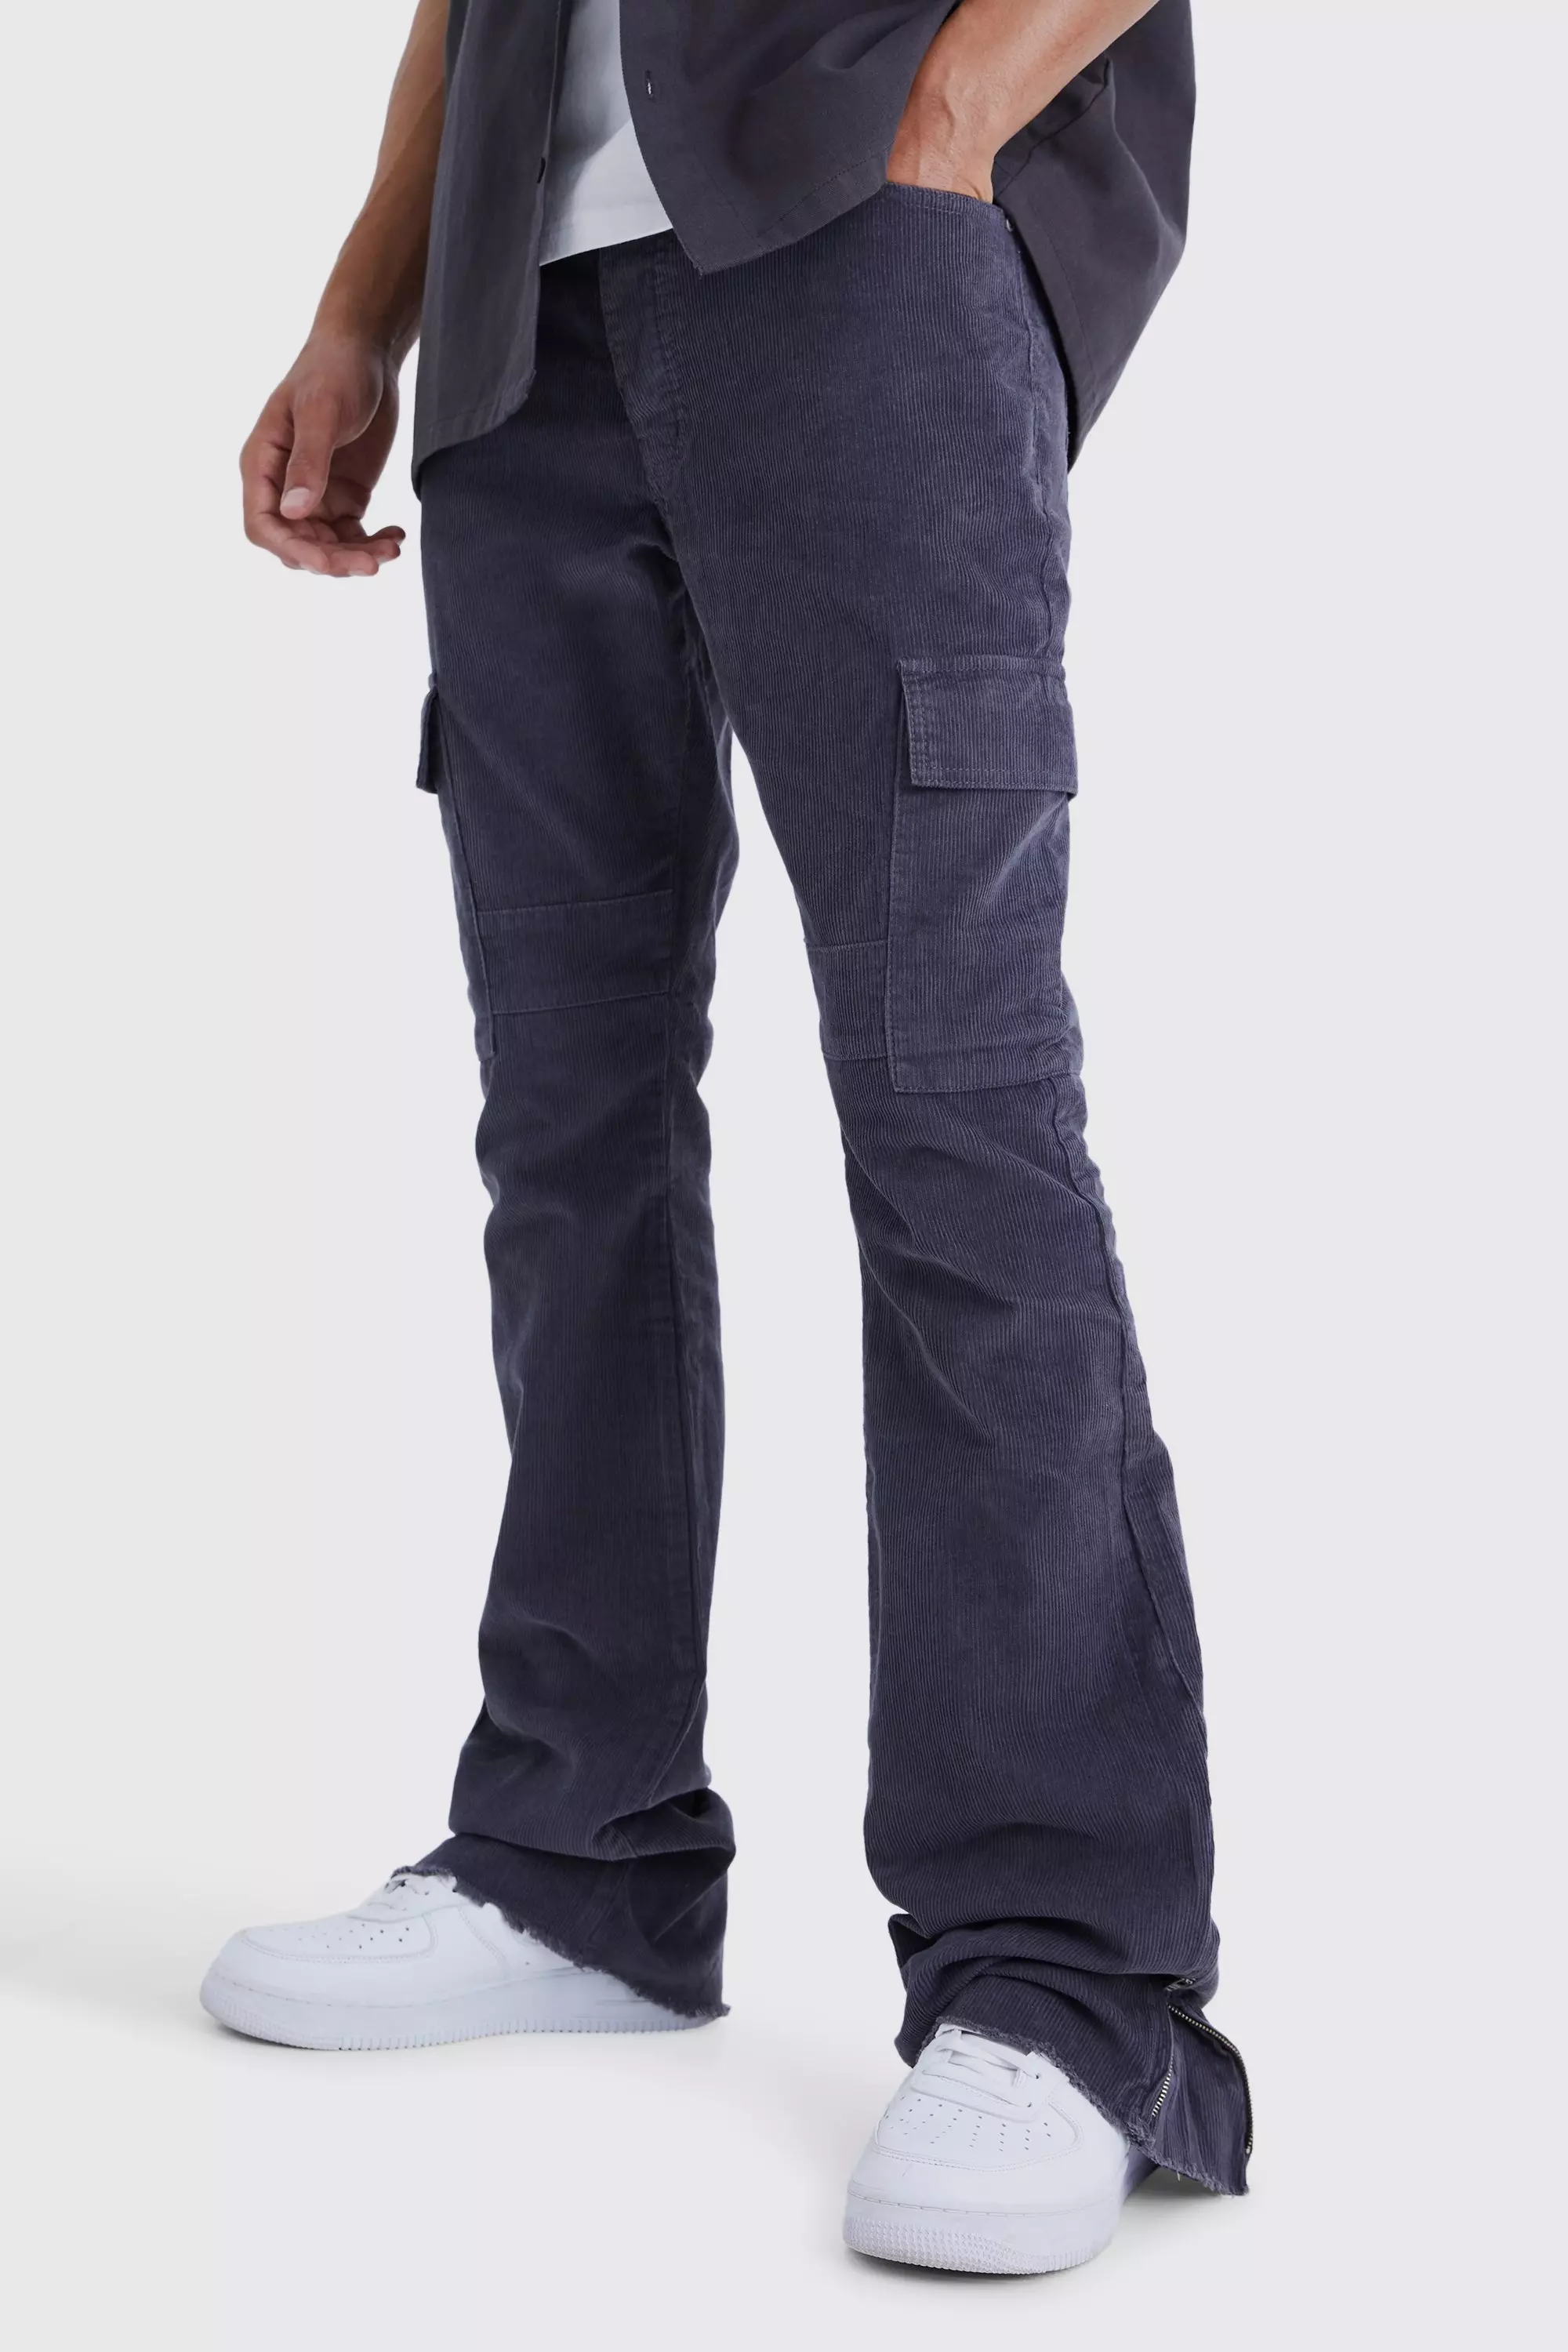 Charcoal Grey Tall Fixed Waist Slim Flare Zip Gusset Cord Cargo Pants